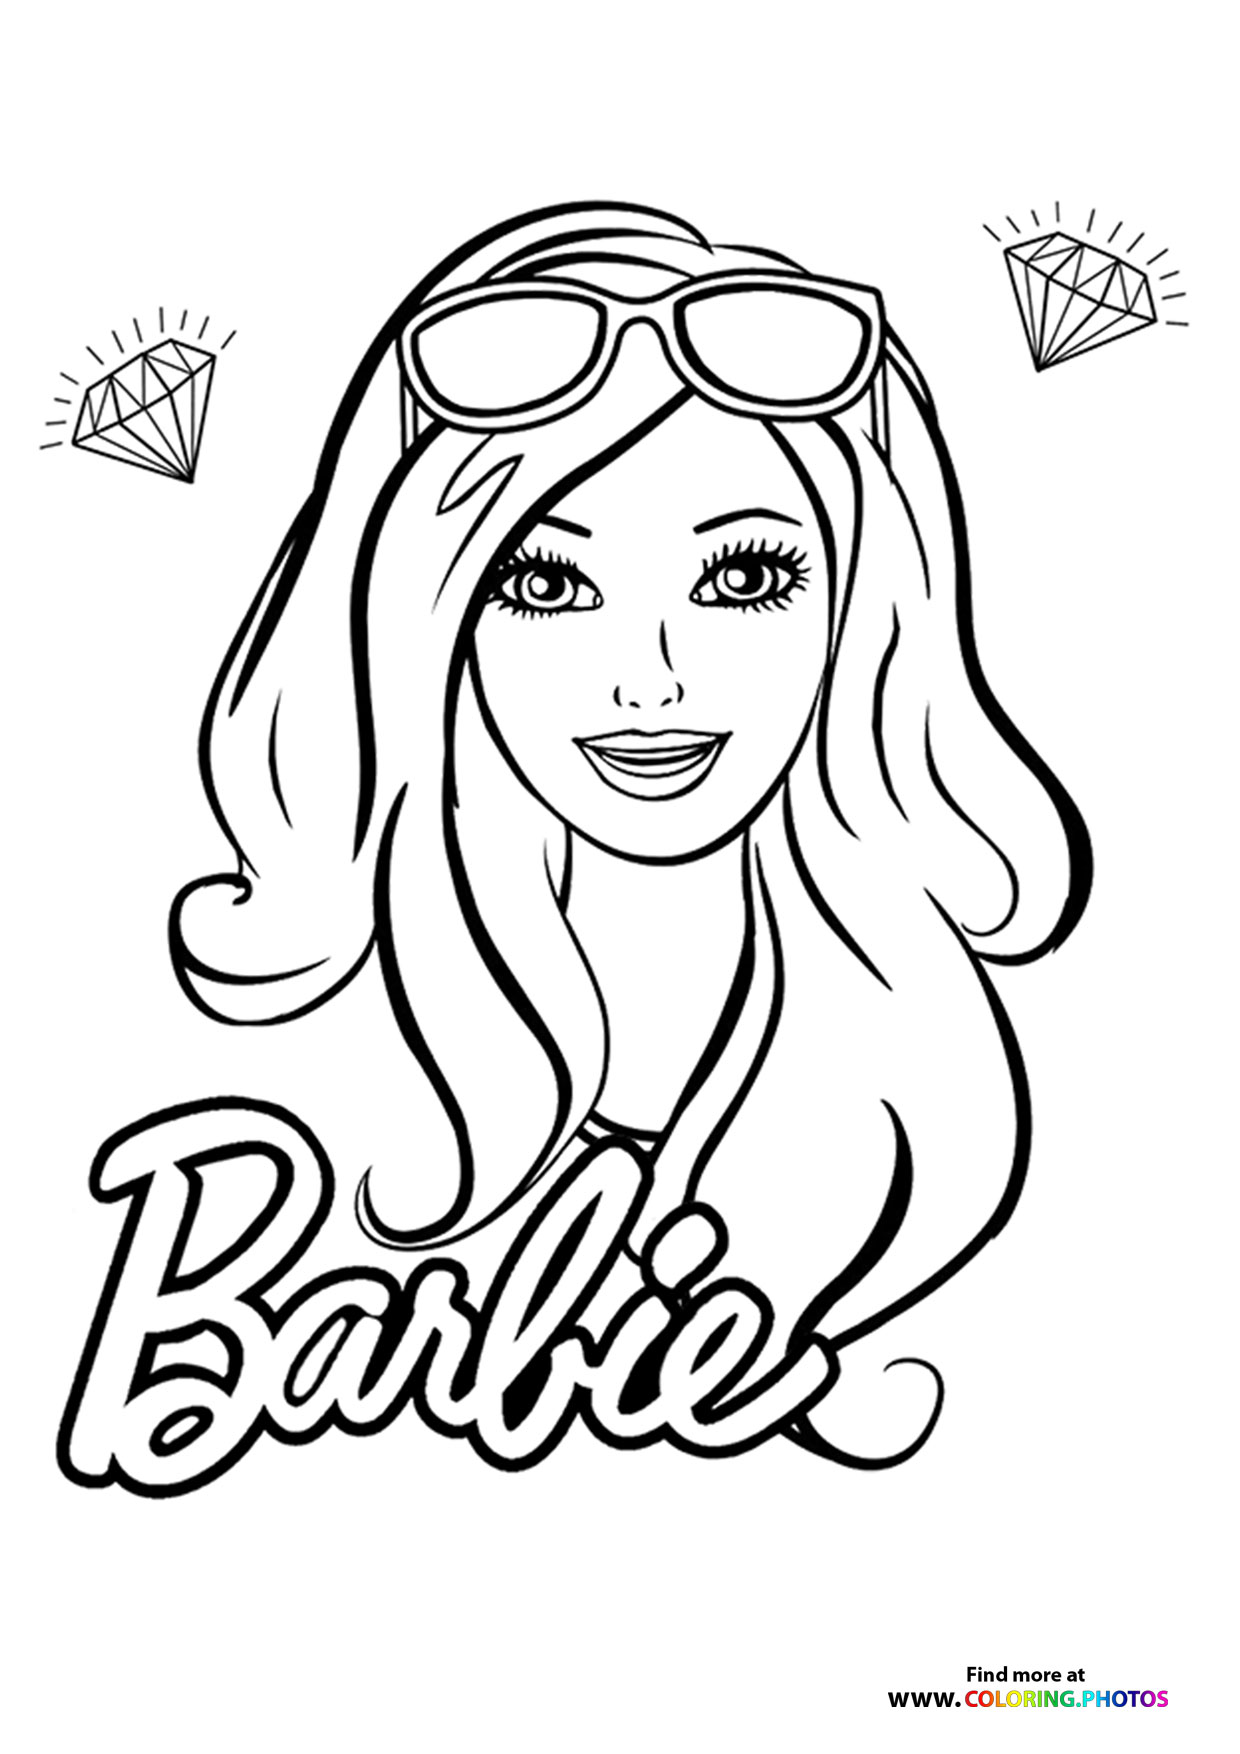 Barbie - Coloring Pages for kids | 100 ...